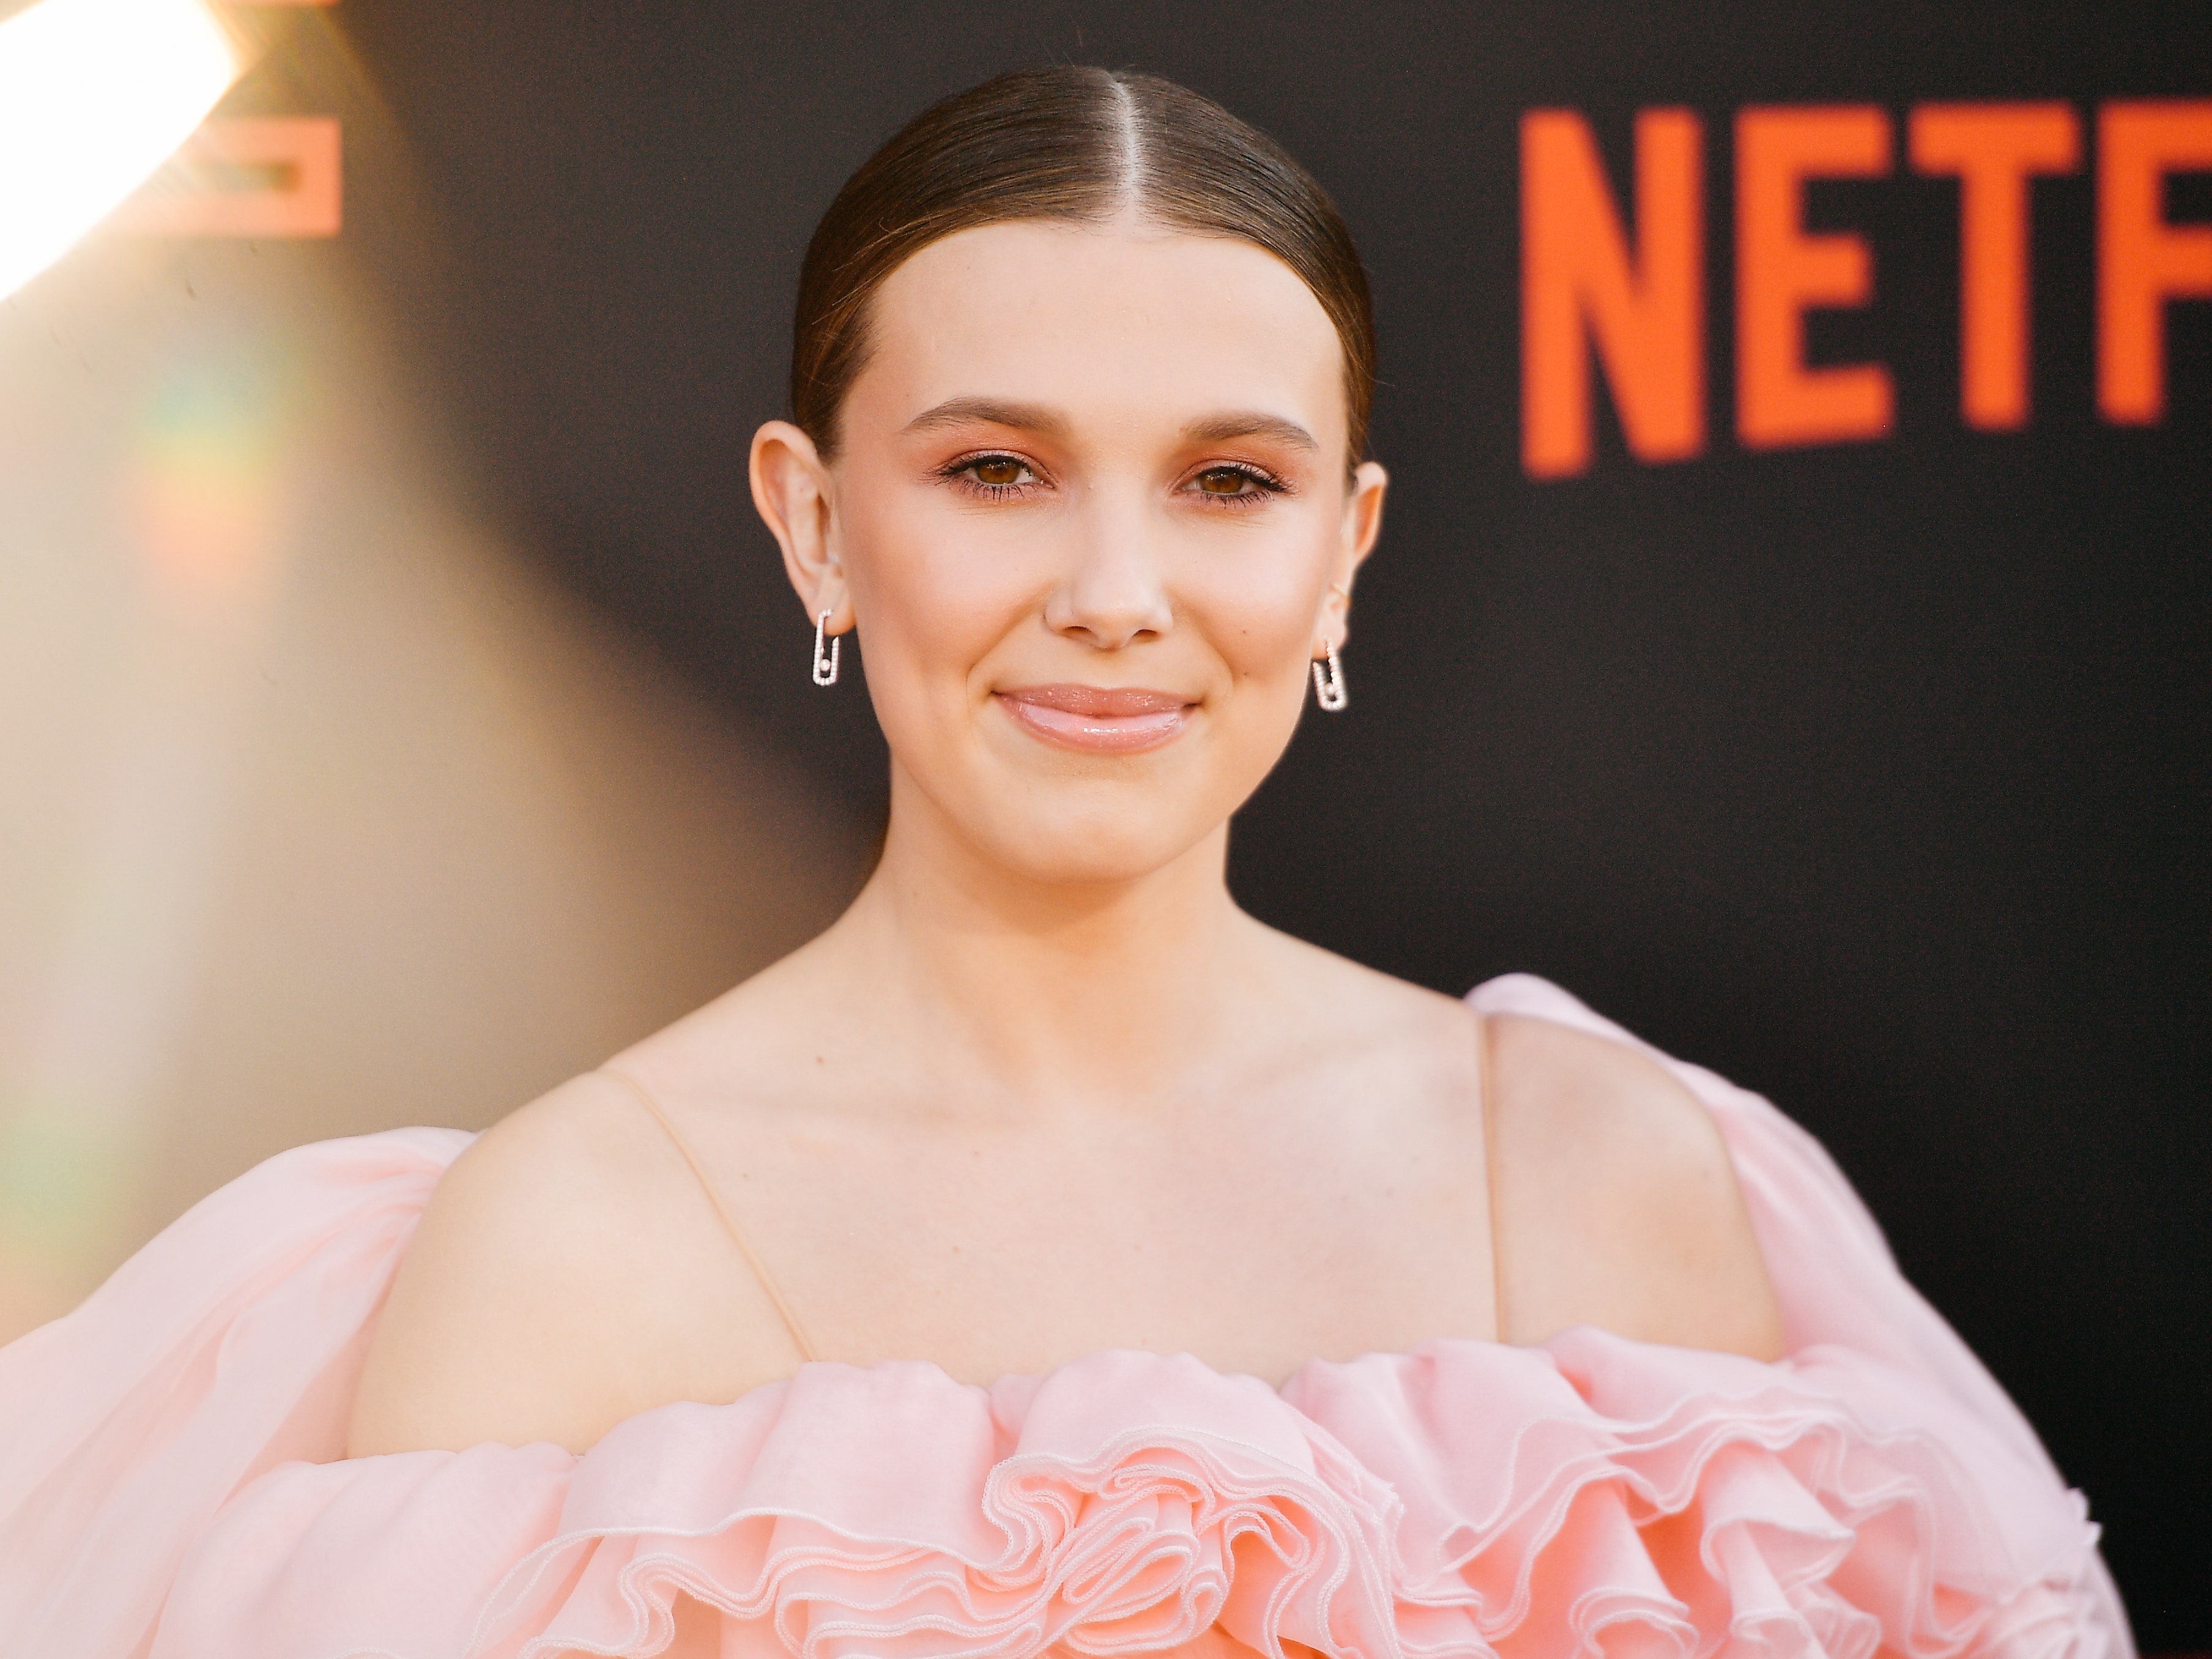 Millie bobby browns second th birthday dress has major cinderella vibes â see photos teen vogue